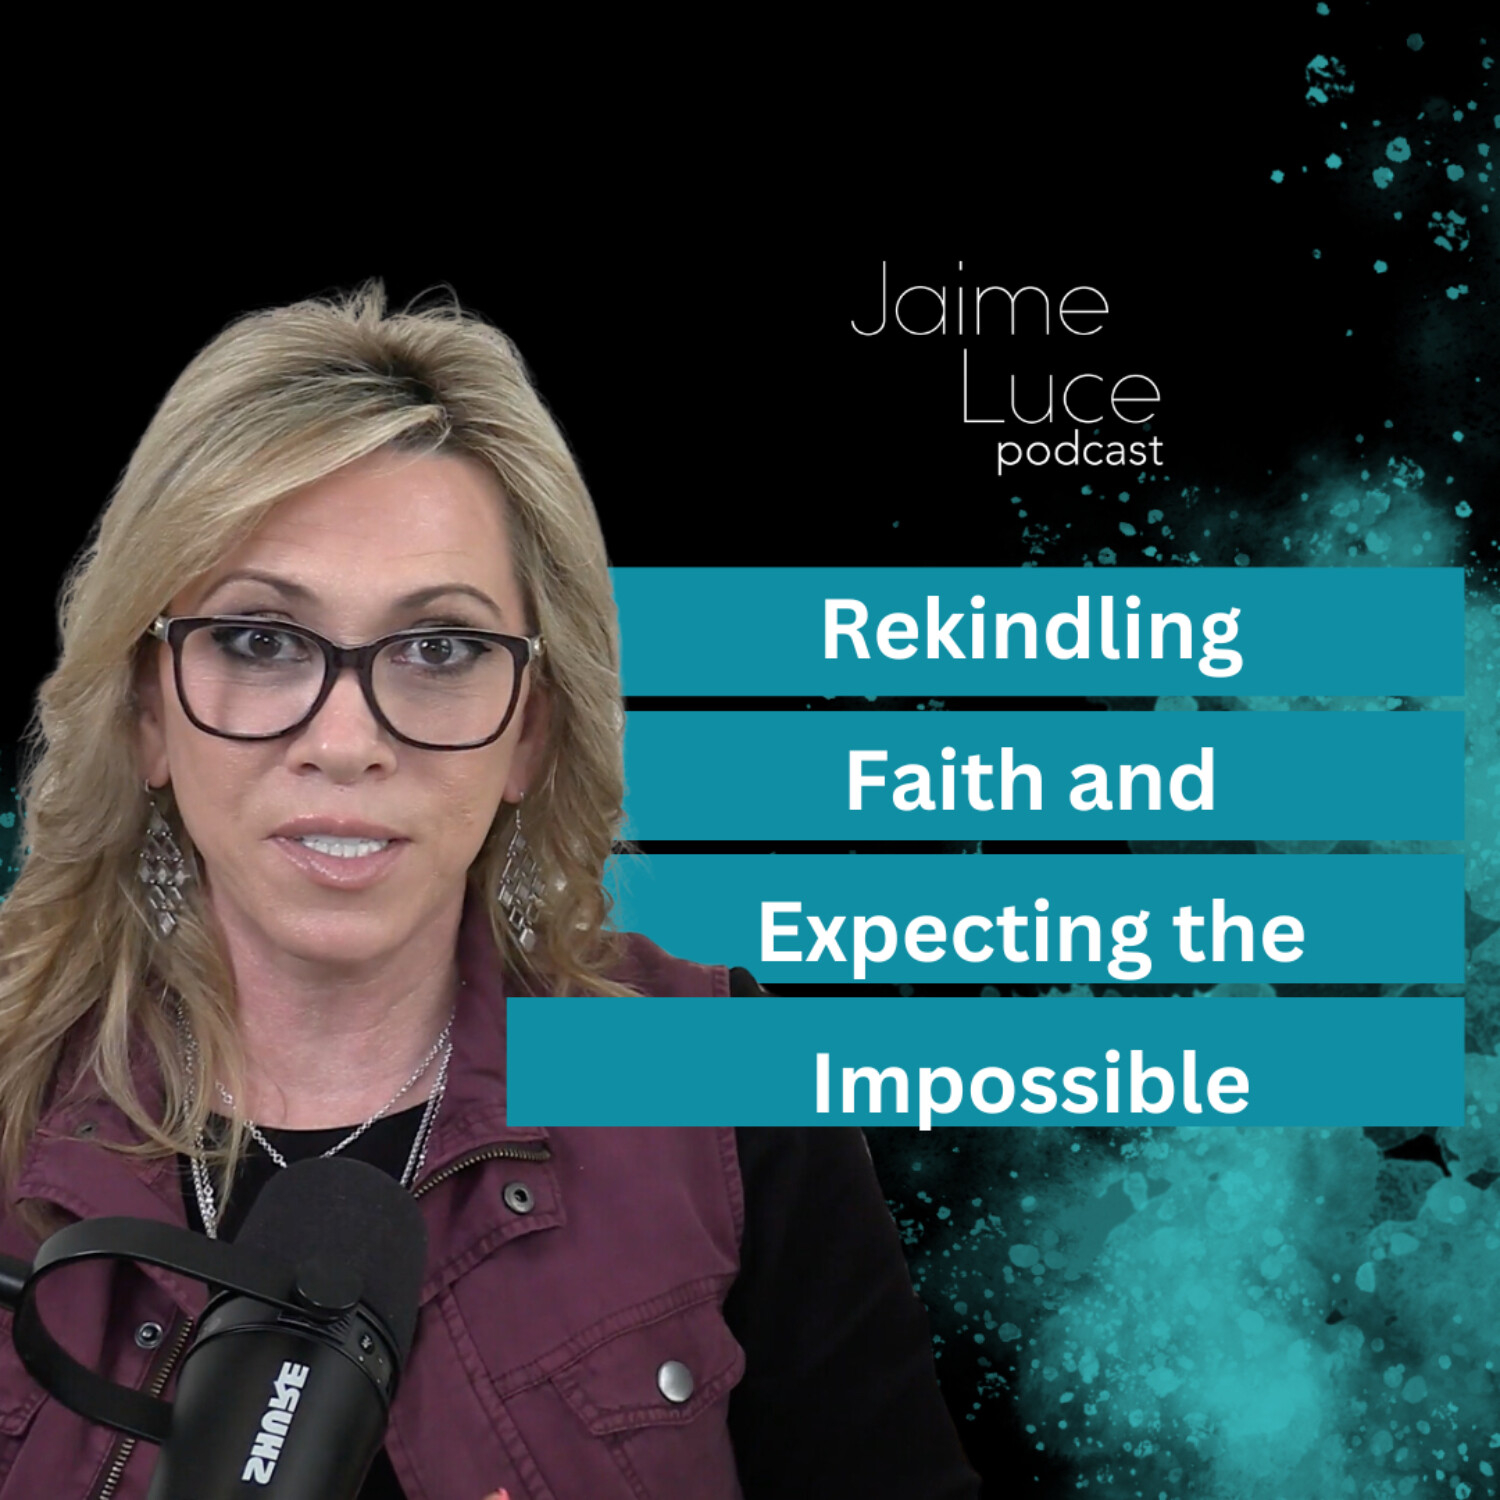 Rekindling Faith and Expecting the Impossible